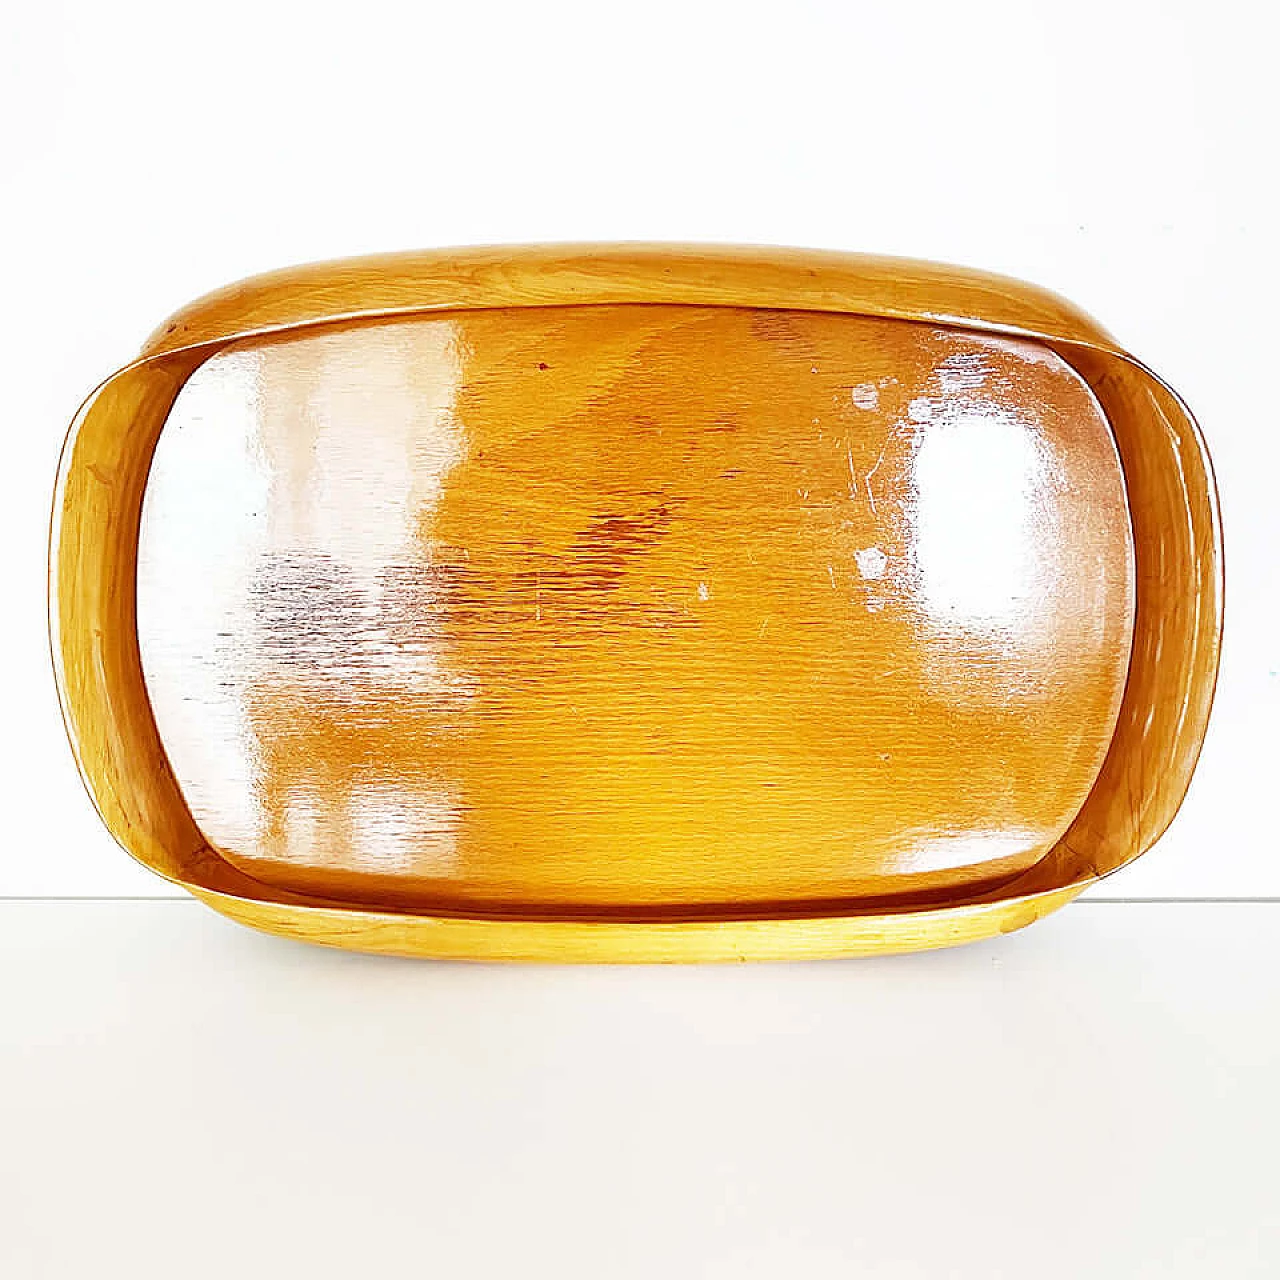 6 Studio Sottssas glasses for Egizia and Macabo tray attributed to Tura, 1950s and 1990s 4